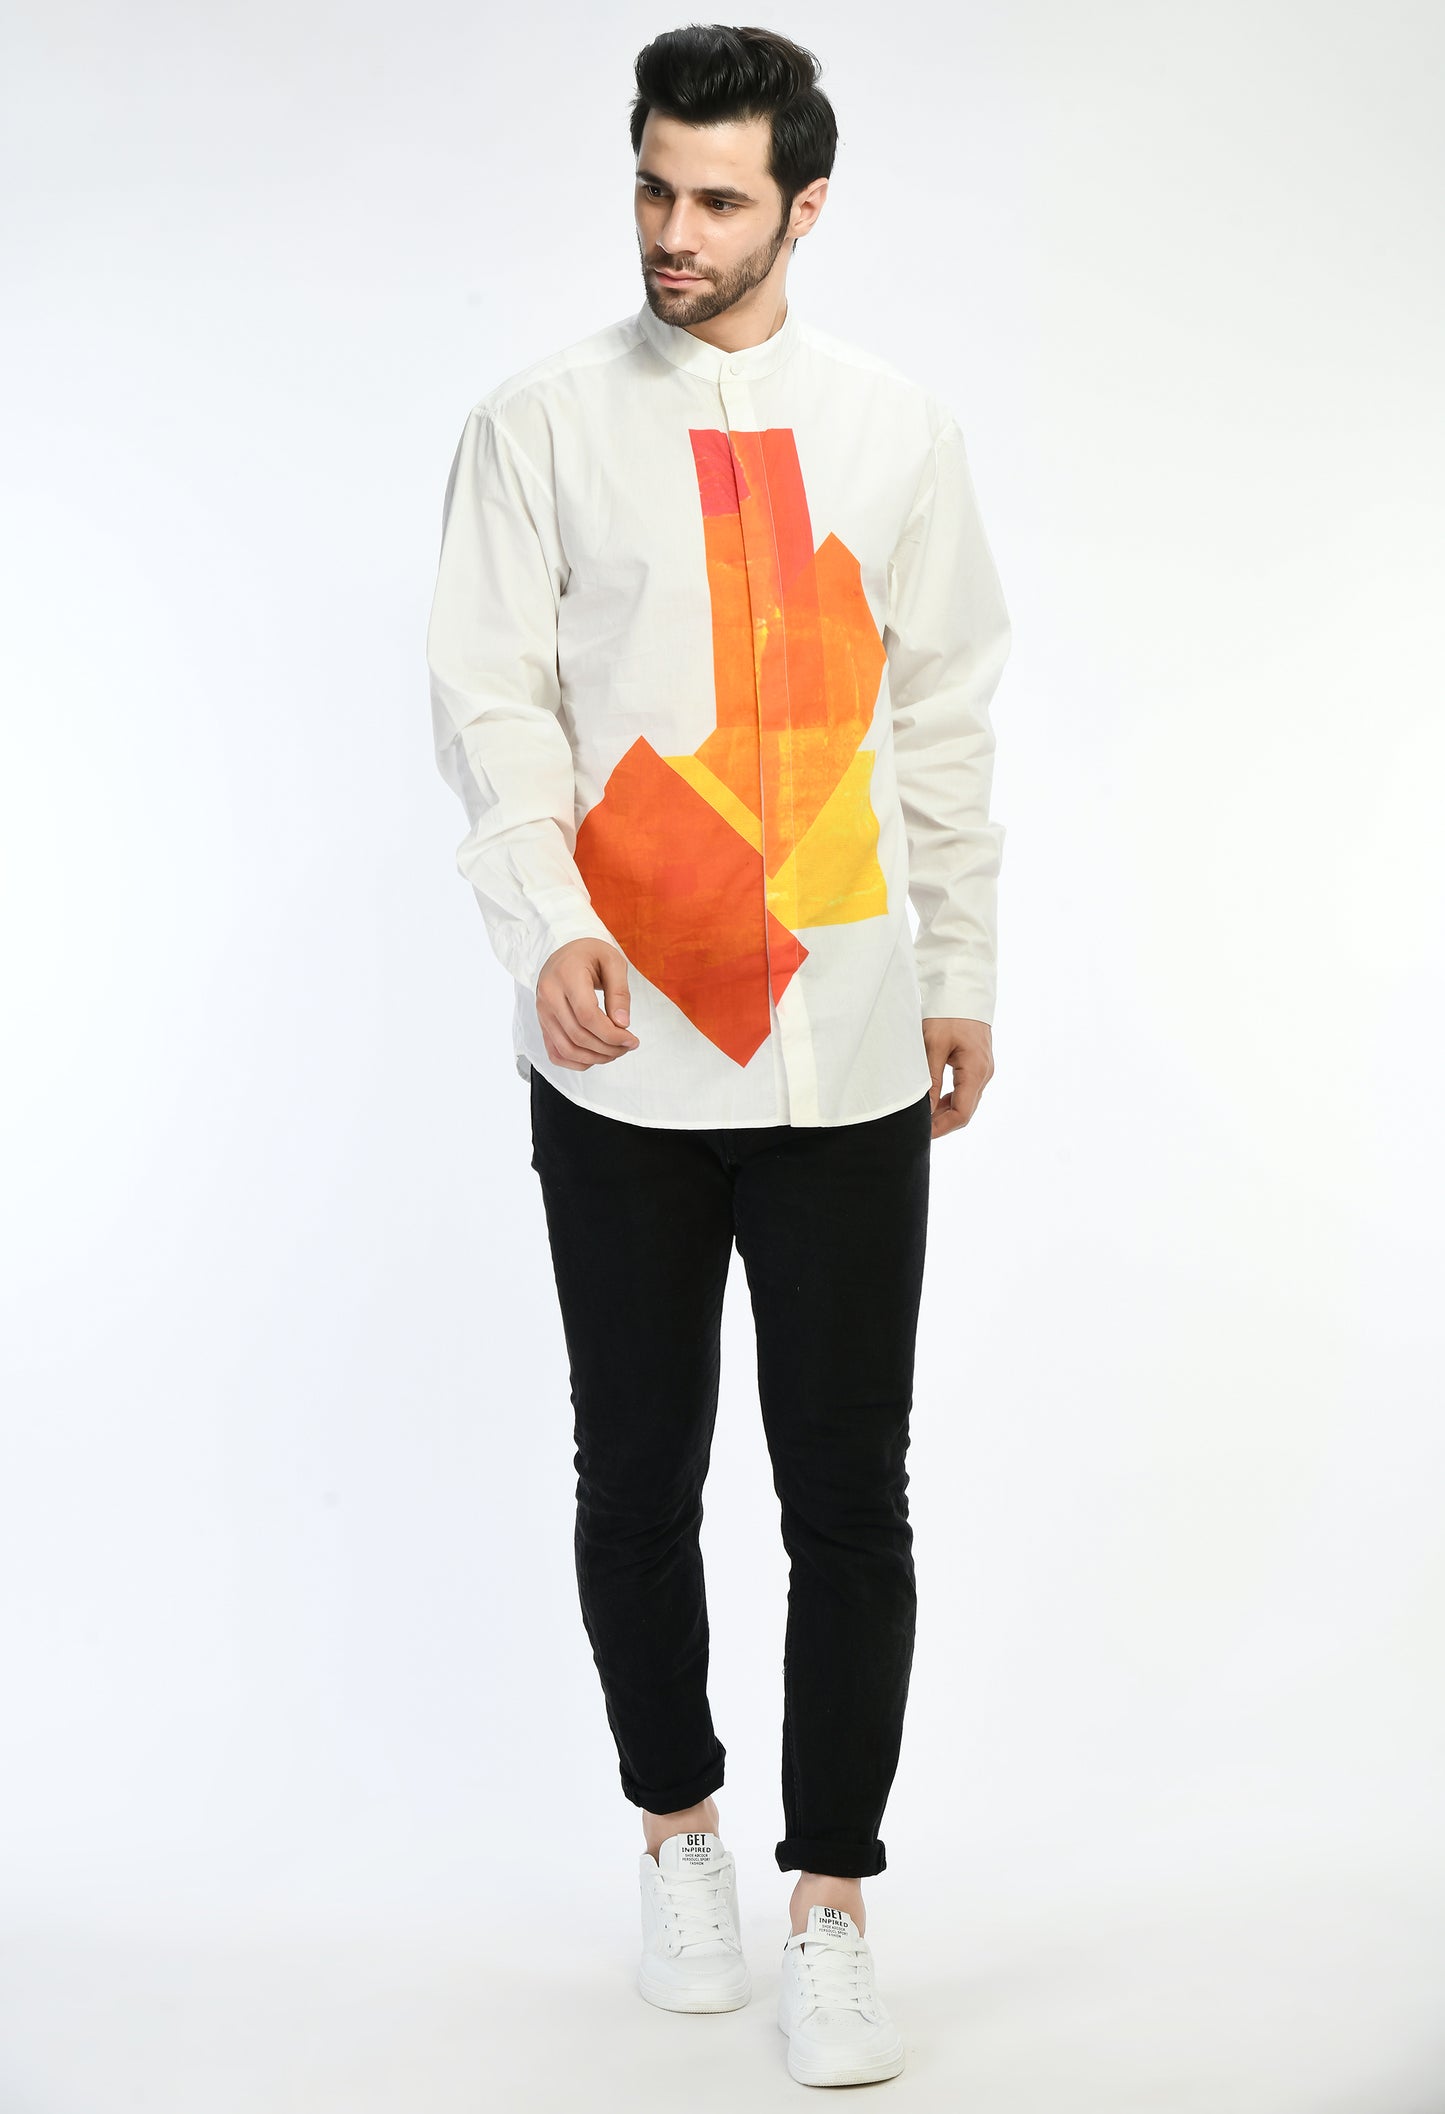 White cotton shirt showcasing abstract digital print in the front.